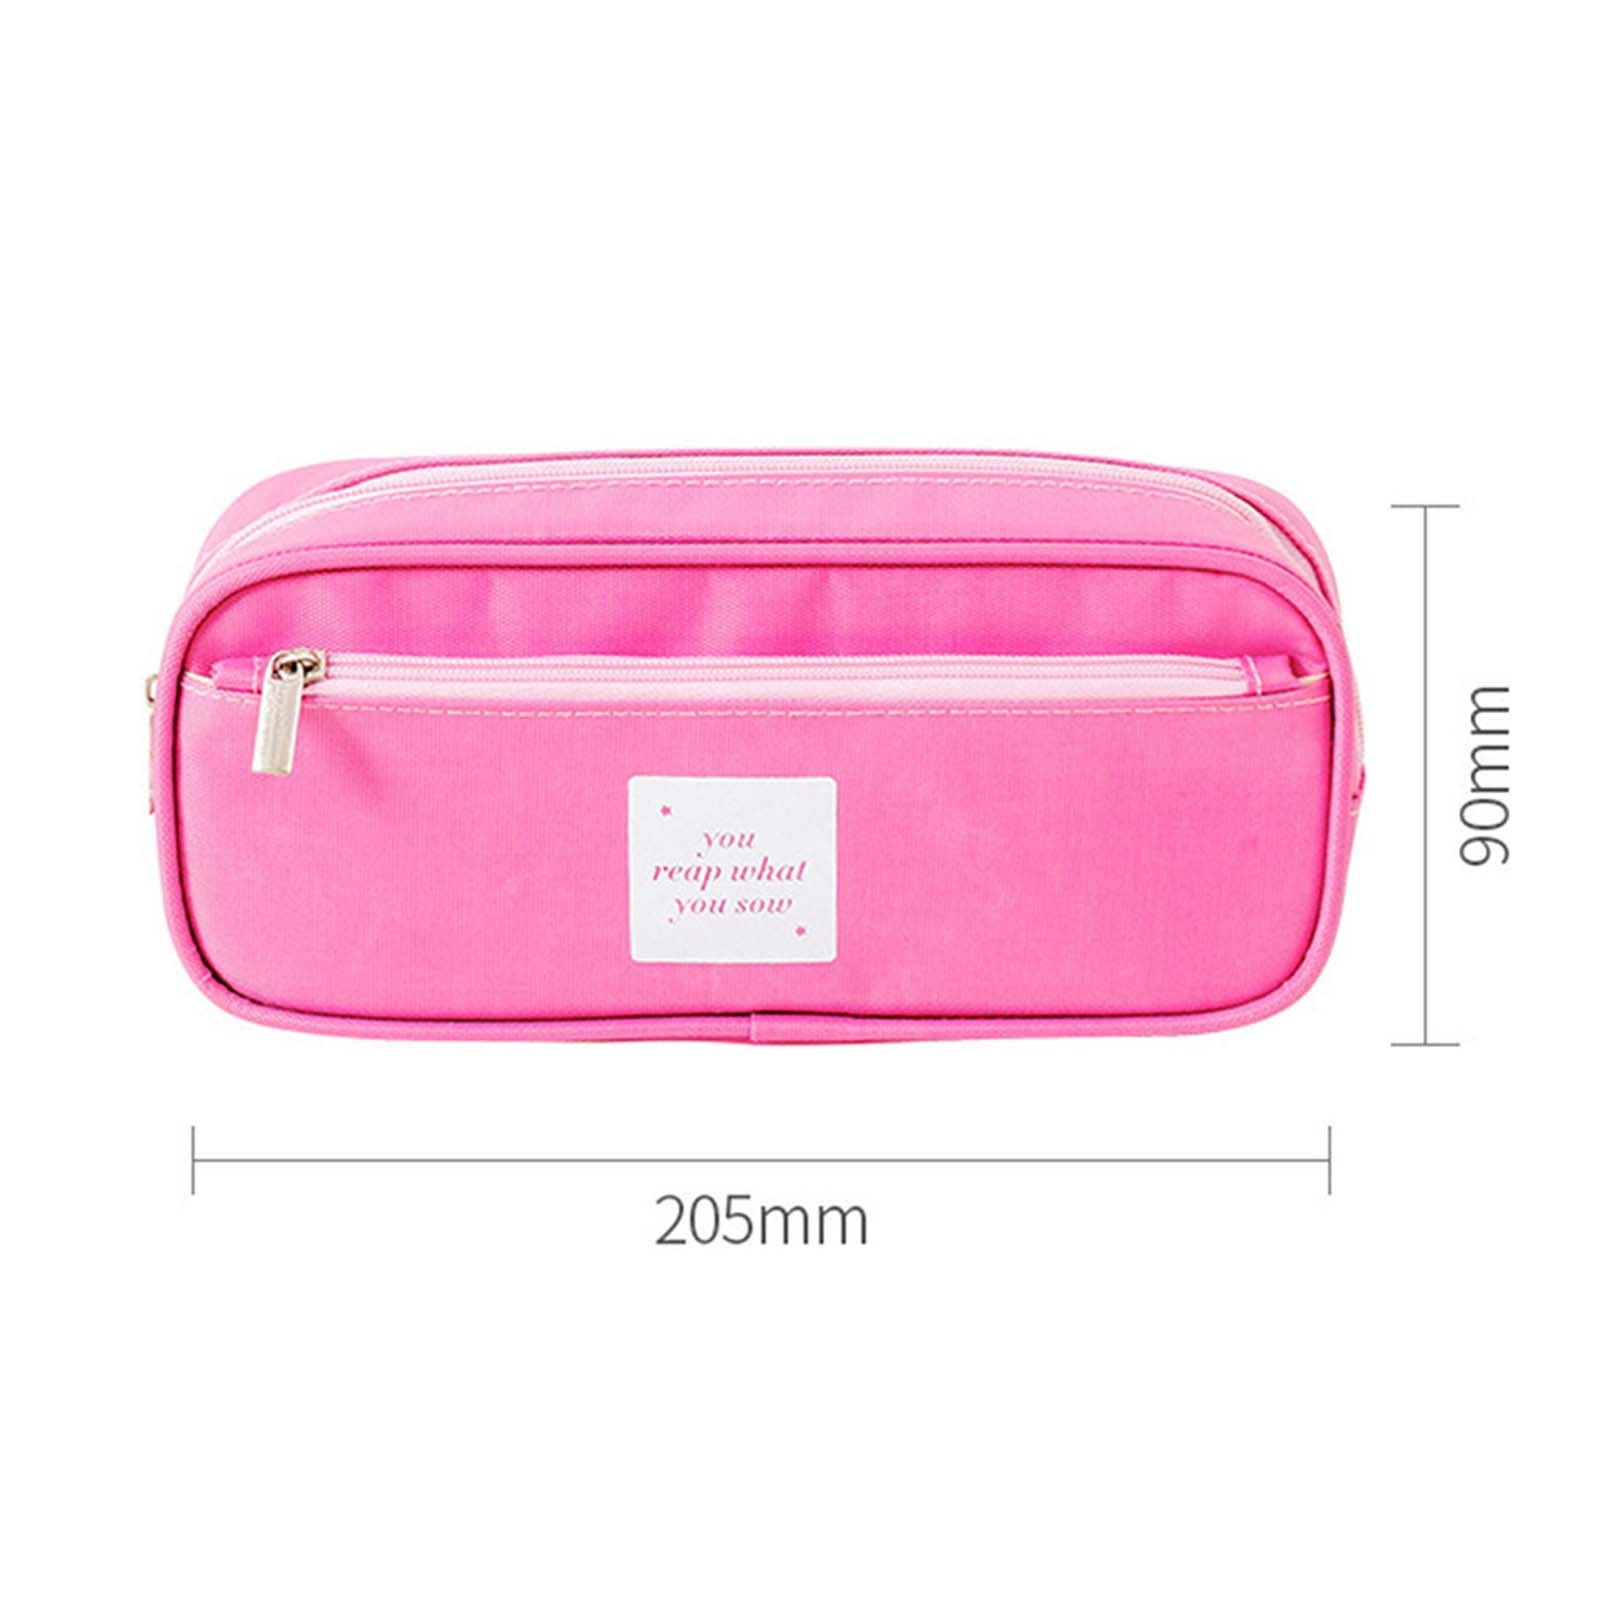 Oavqhlg3b Large Capacity Pencil Case Nylon Pencil Pouch with Zipper Double Layer Large Capacity Waterproof Pencil Bag, Size: One size, Pink